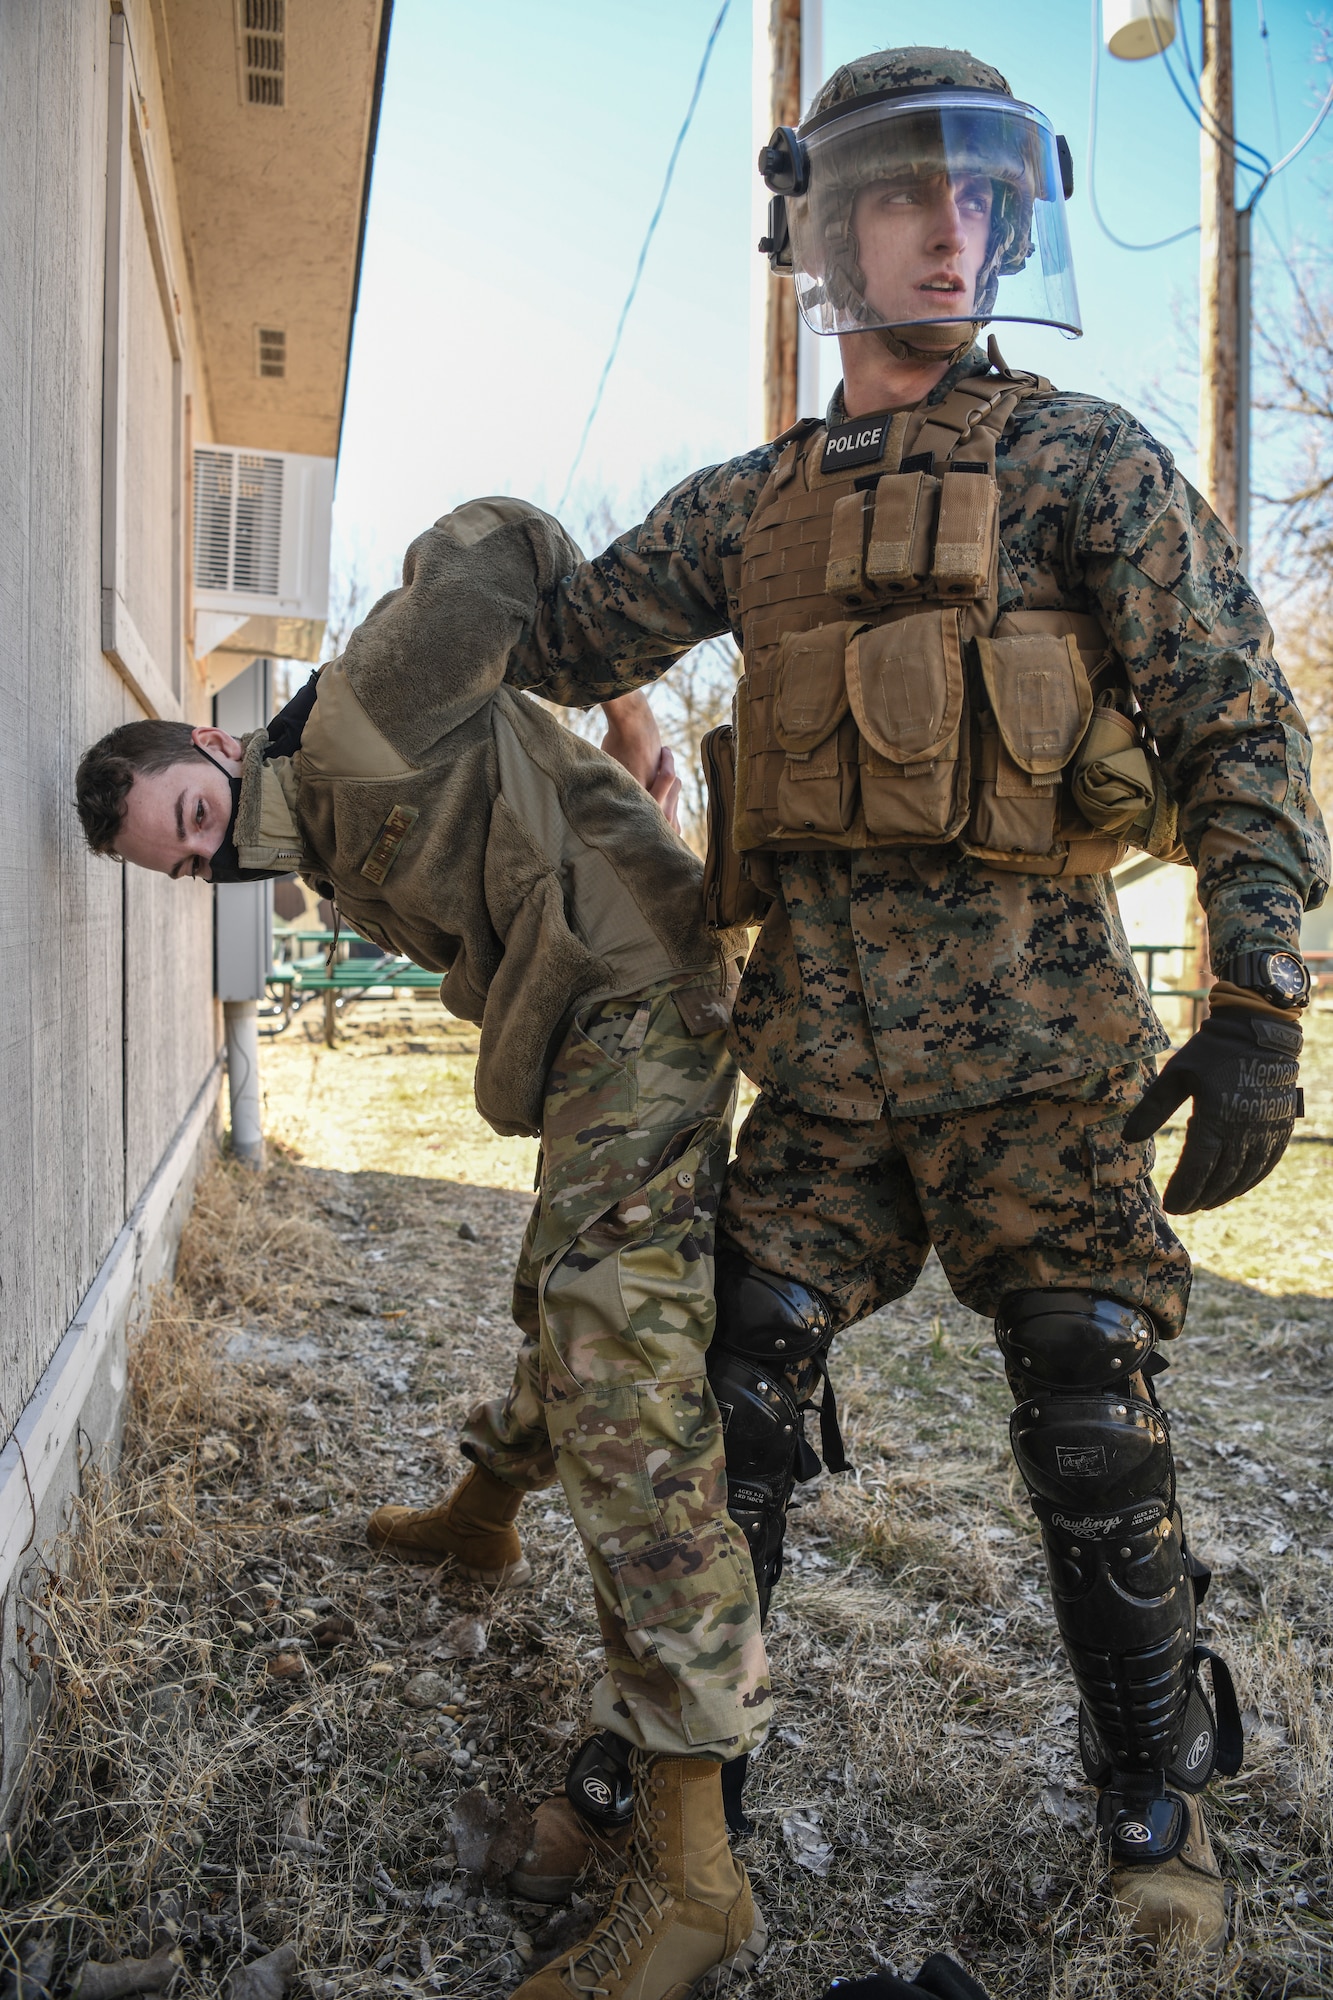 Lance Corporal Colton Sabrowski, Charlie Company, 4th Law Enforcement Battalion Wright-Patterson Air Force Base, Ohio, searches Senior Airman Scott Araujo, 445th Security Forces Squadron, WPAFB, for any dangerous or unlawful items during a training exercise at the Warfighter Training Center here March 6th, 2021. Both Marines and Airmen participated in the detainee operations training adding elements of experience from each branch of service providing total force integration. This experience provides an opportunity for each branch involved to learn and benefit from each other’s techniques. (U.S. Air Force photo by Master Sgt. Patrick OReilly)